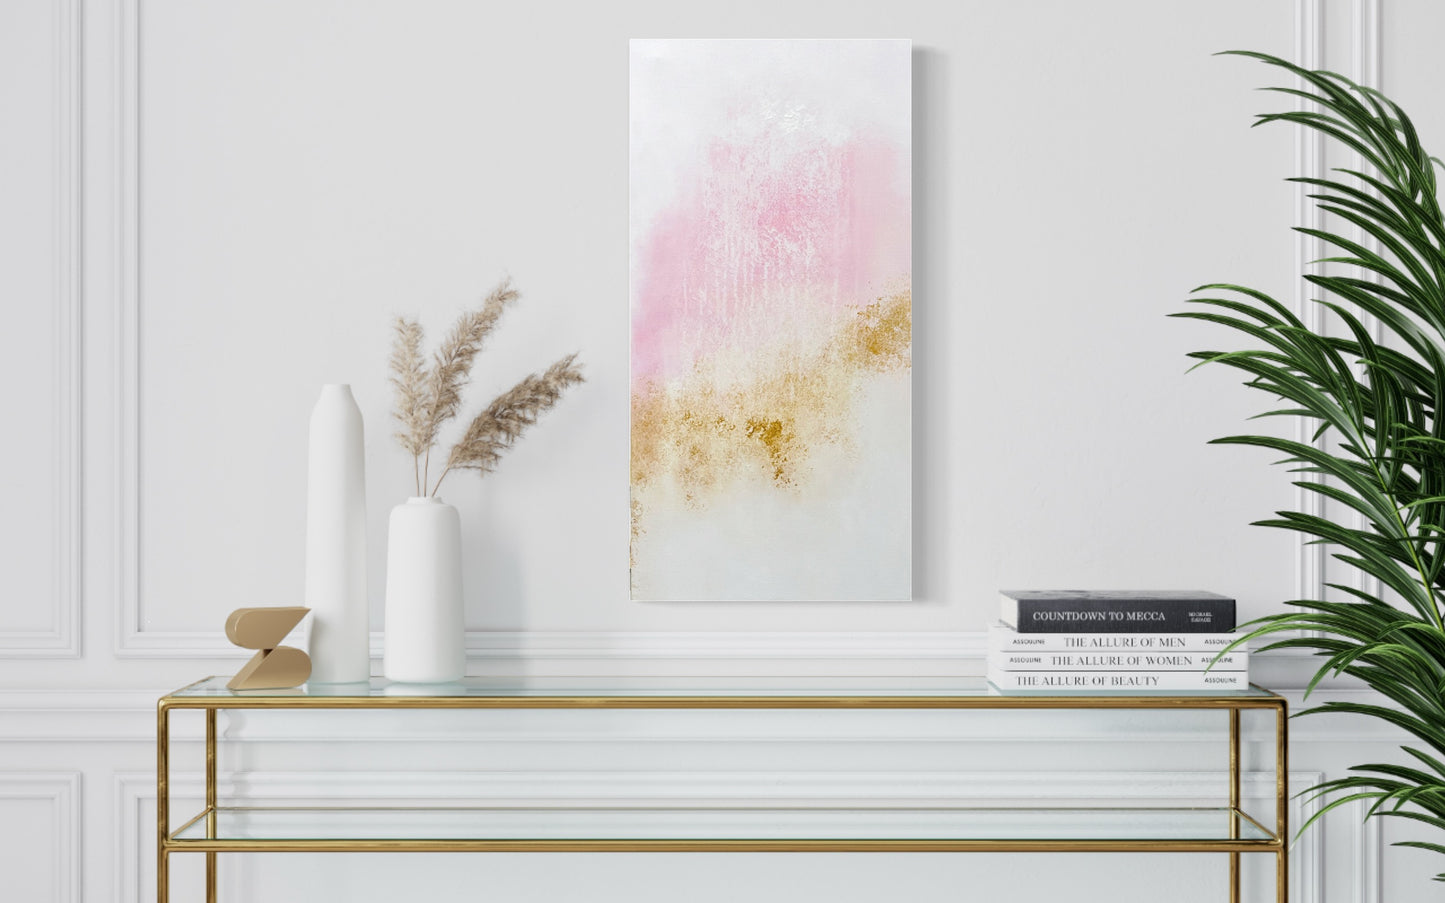 non representational artist, abstract artist, black female artist, home decor, mixed media, gold leaf, peach and white acrylic paint